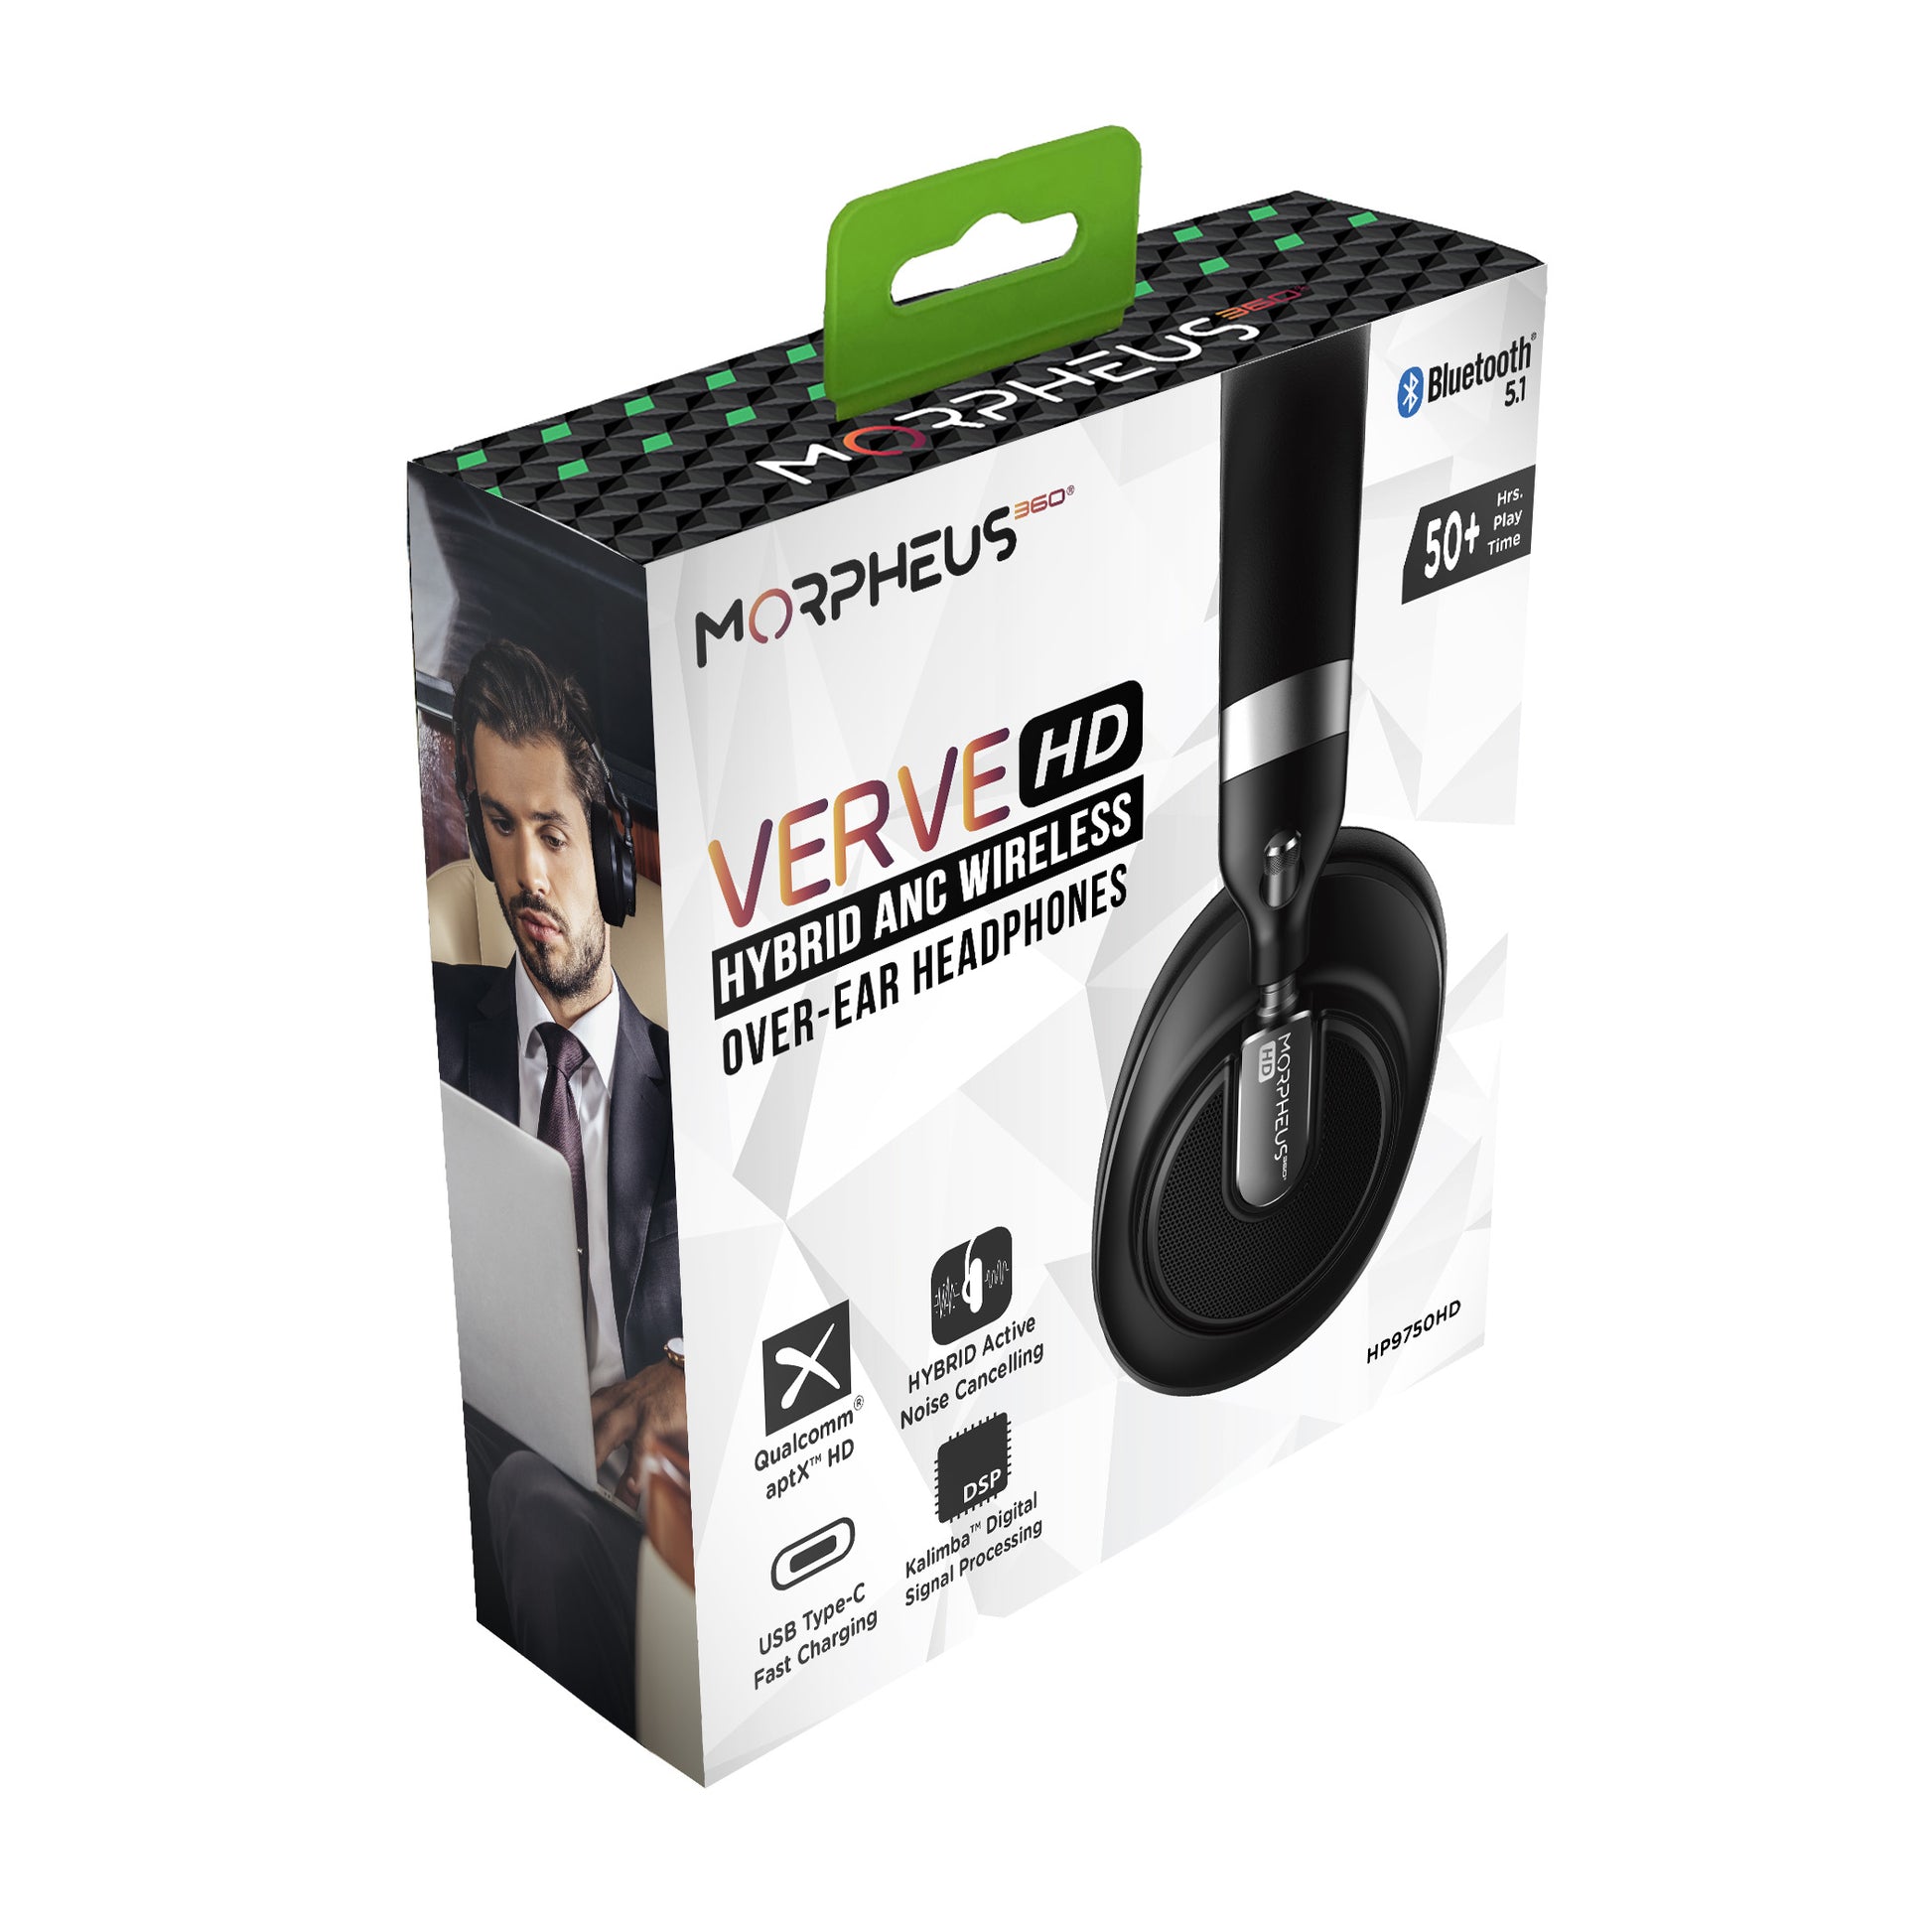 Photo of Morpheus 360 Verve HD Hybrid Wireless ANC Noise Cancelling Headphones Retail Packaging, displays a side view of the Verve HD Headphones, Bluetooth 5.1, 50+ Hours of Playtime, Qualcomm aptX HD, Hybrid Active Noise Cancelling, USB Type-C Fast Charging, Kalimba Digital Signal Processing features.